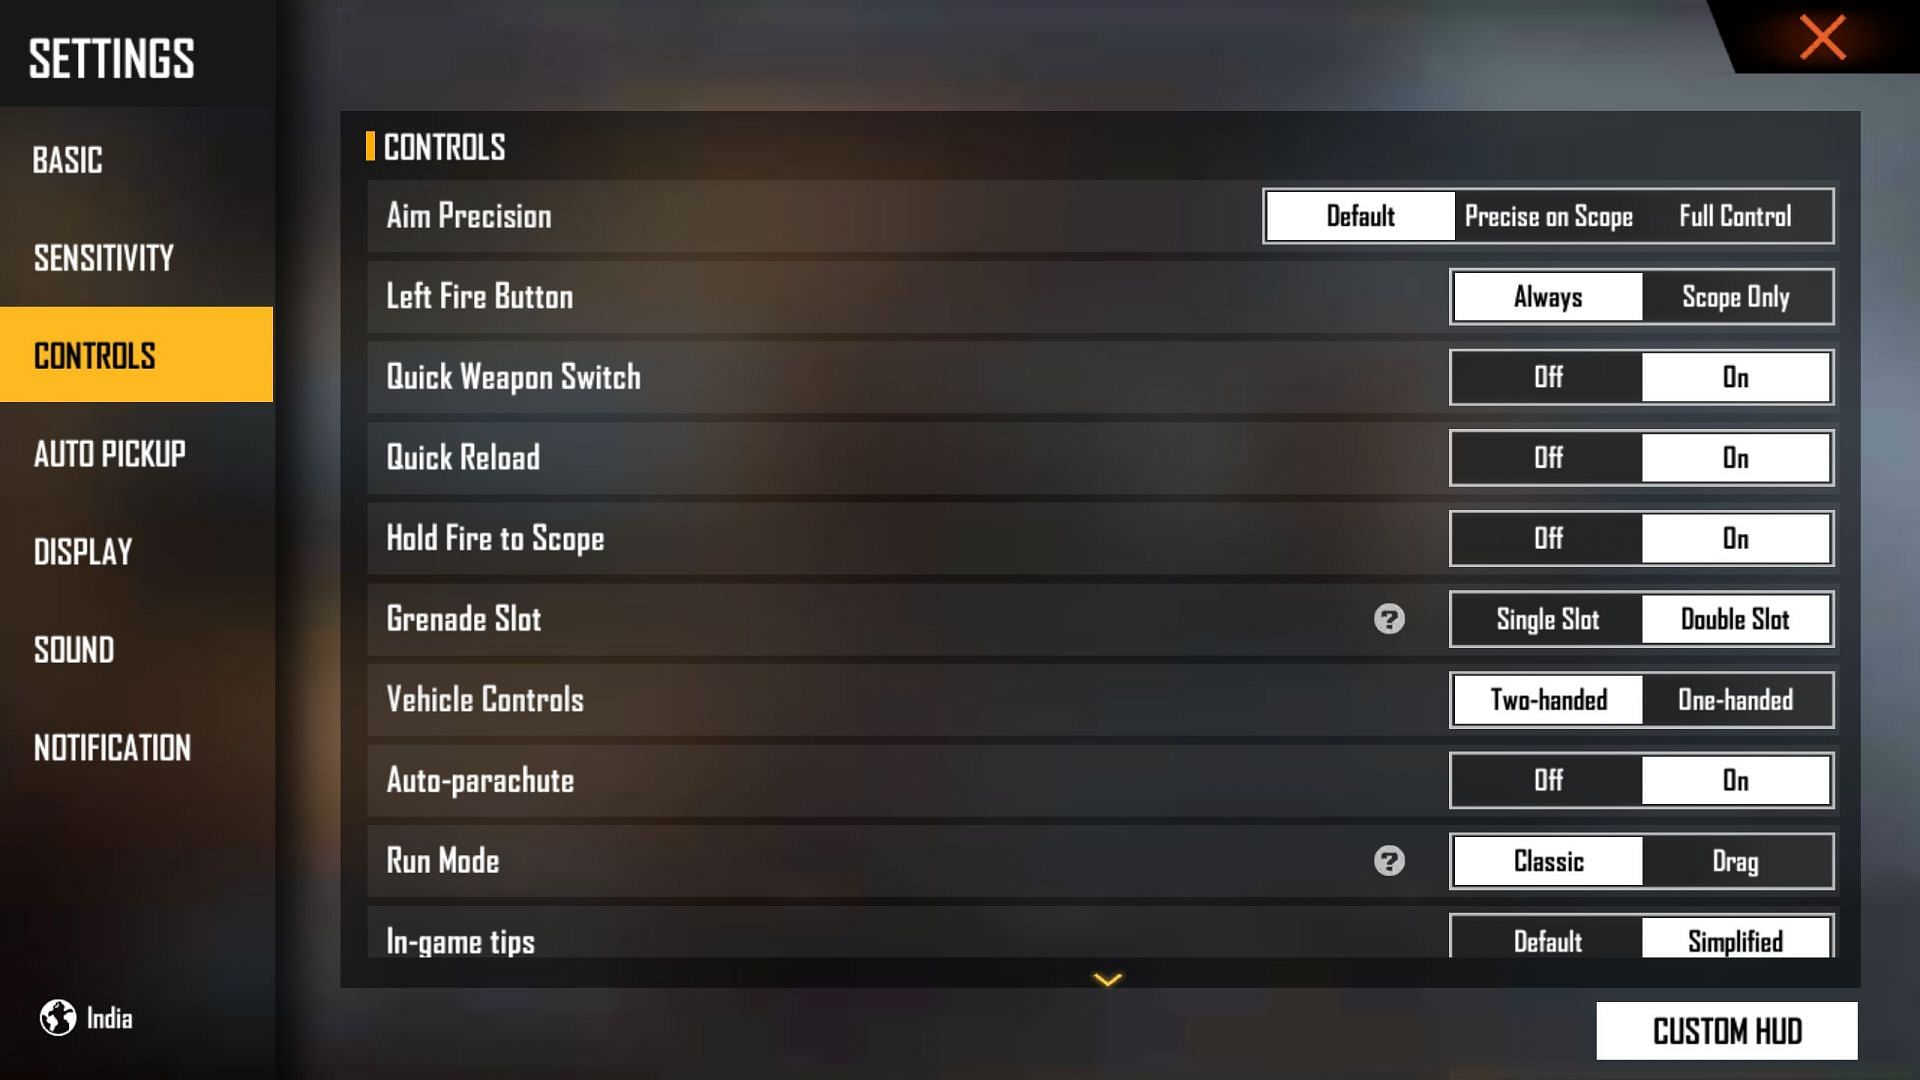 These are the control settings that players can set in the game (Image via Free Fire)